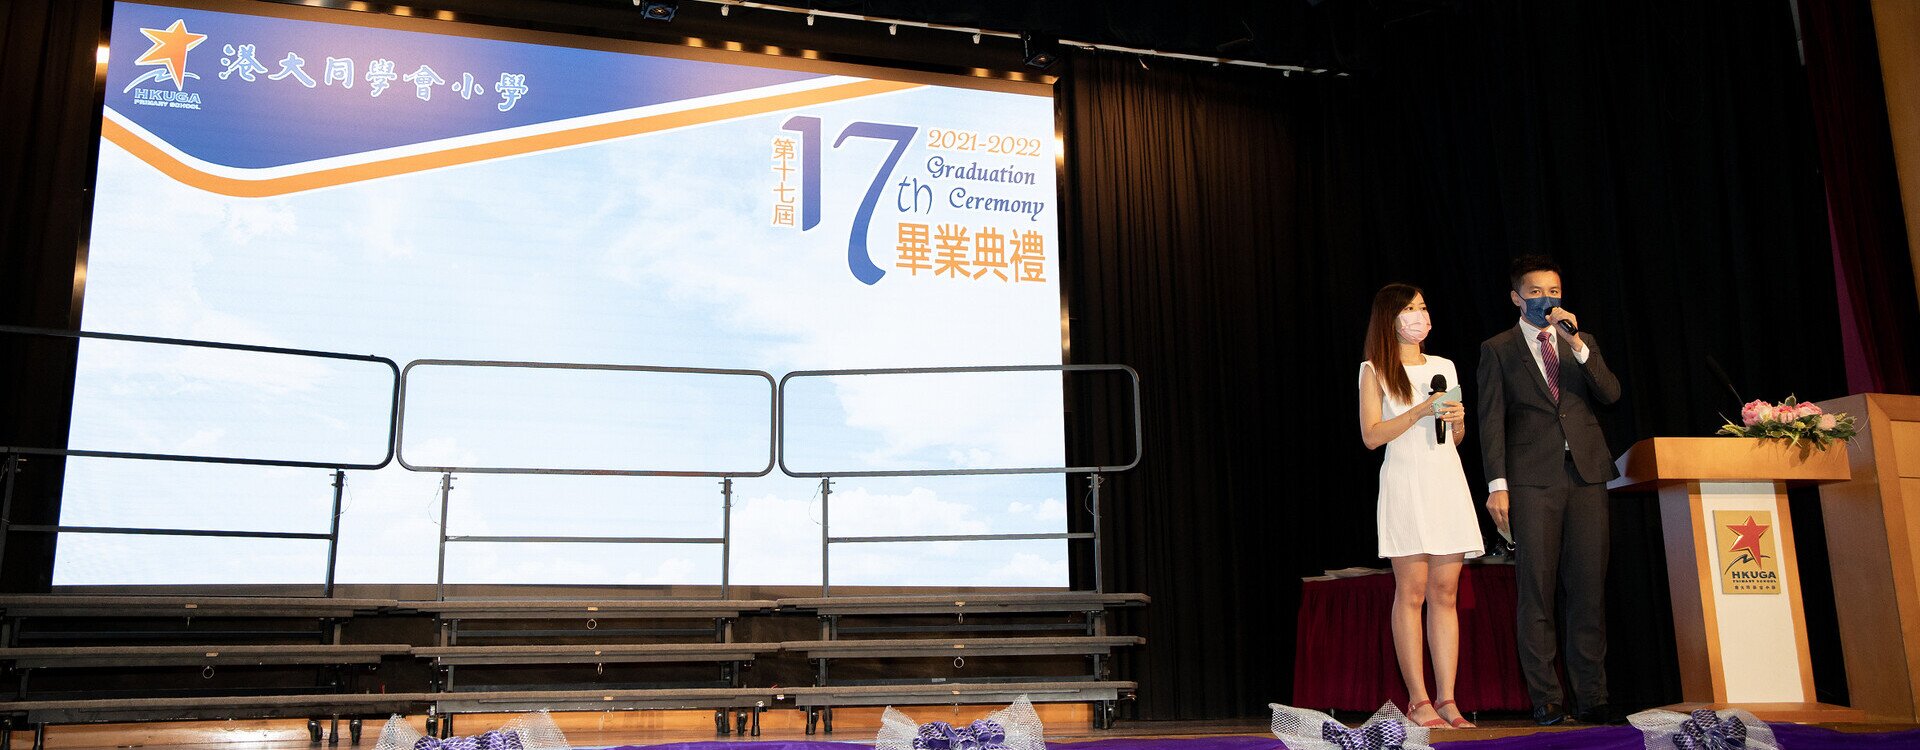 A Warm and Touching Graduation Ceremony - The 17th Graduation Ceremony